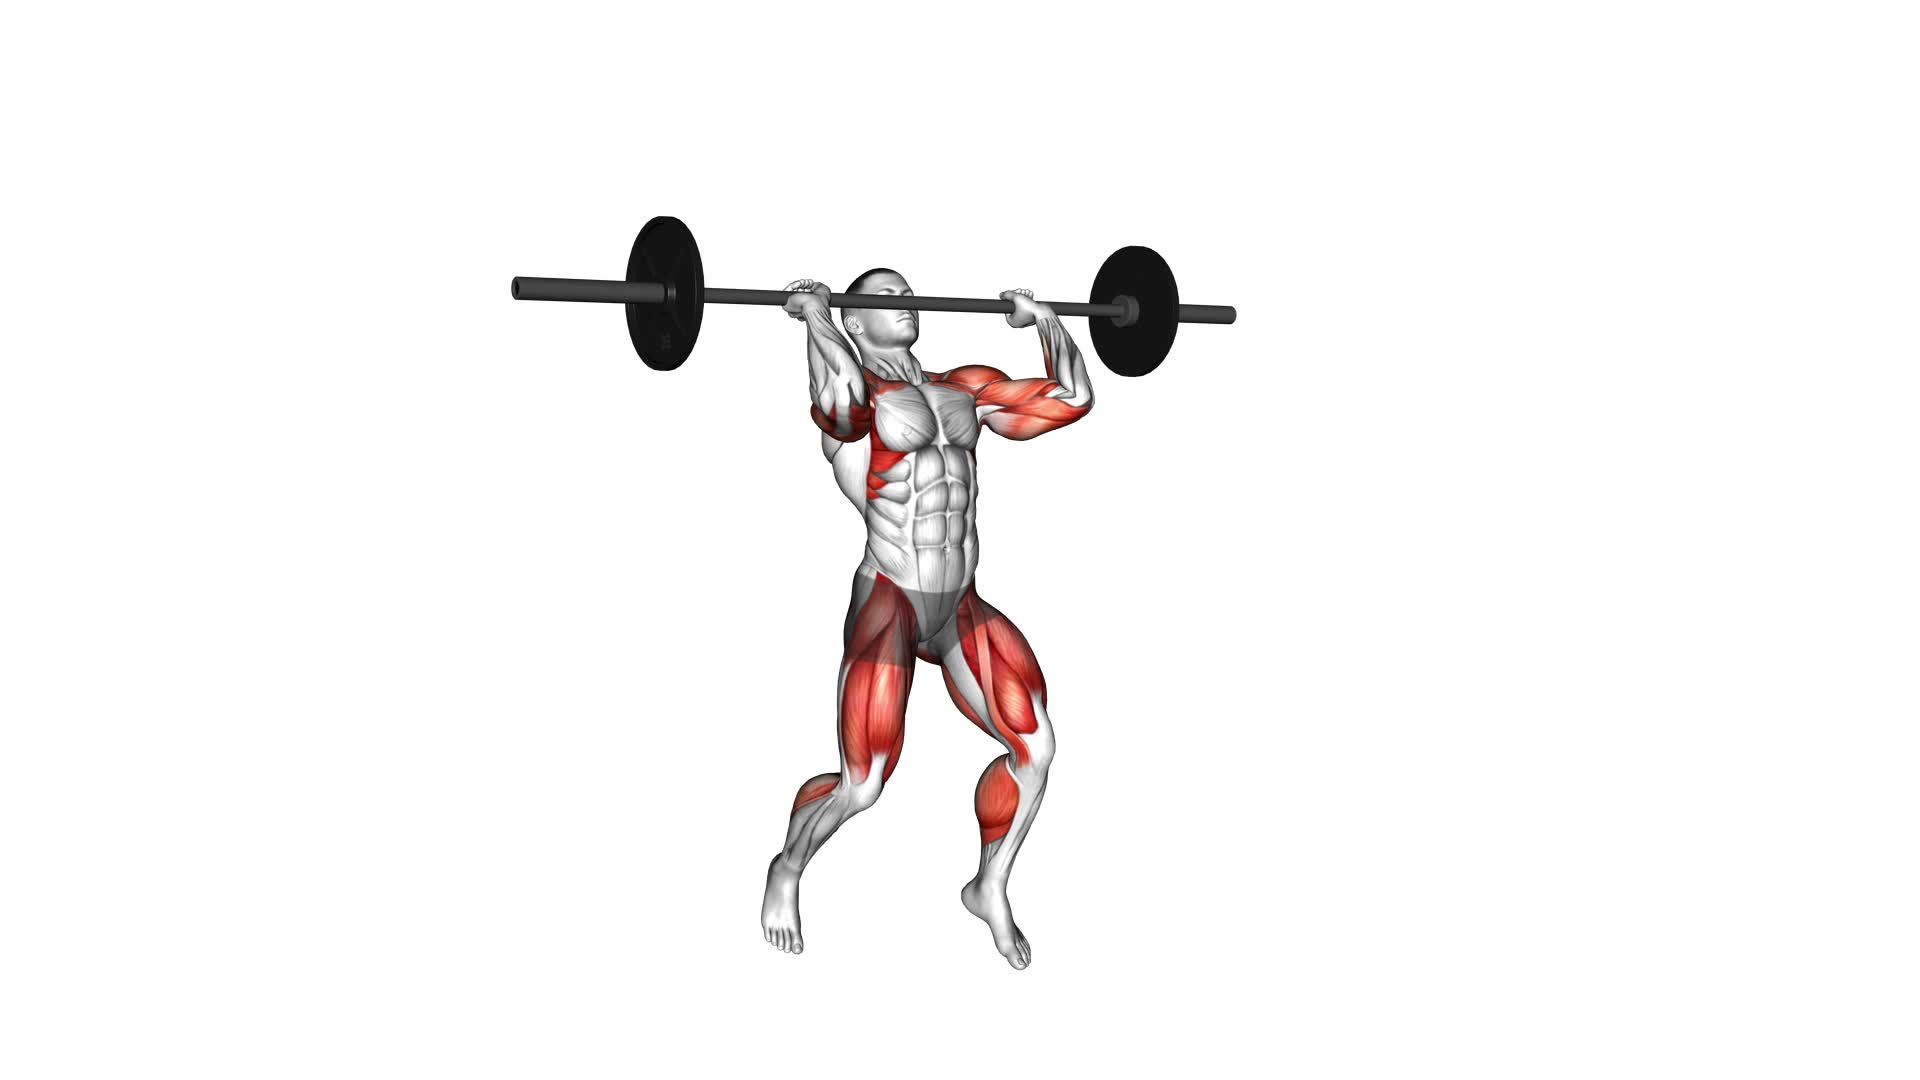 Barbell Clean and Jerk - Video Exercise Guide & Tips